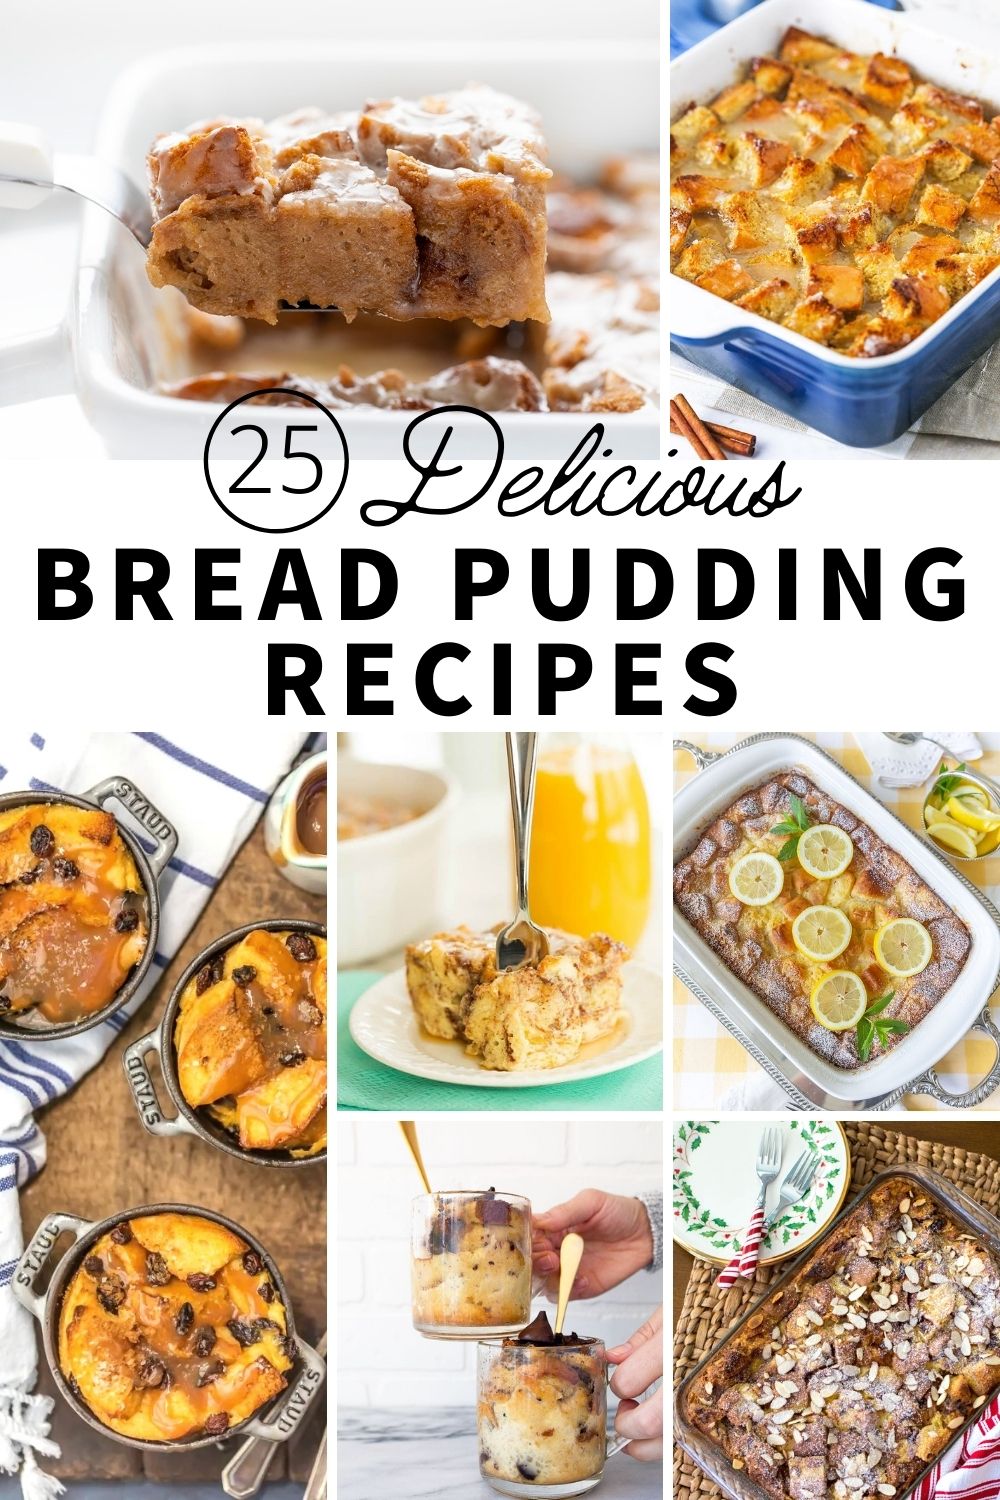 A photo collage shows a variety of bread pudding recipes with the caption: "25 Delicious Bread Pudding Recipes"